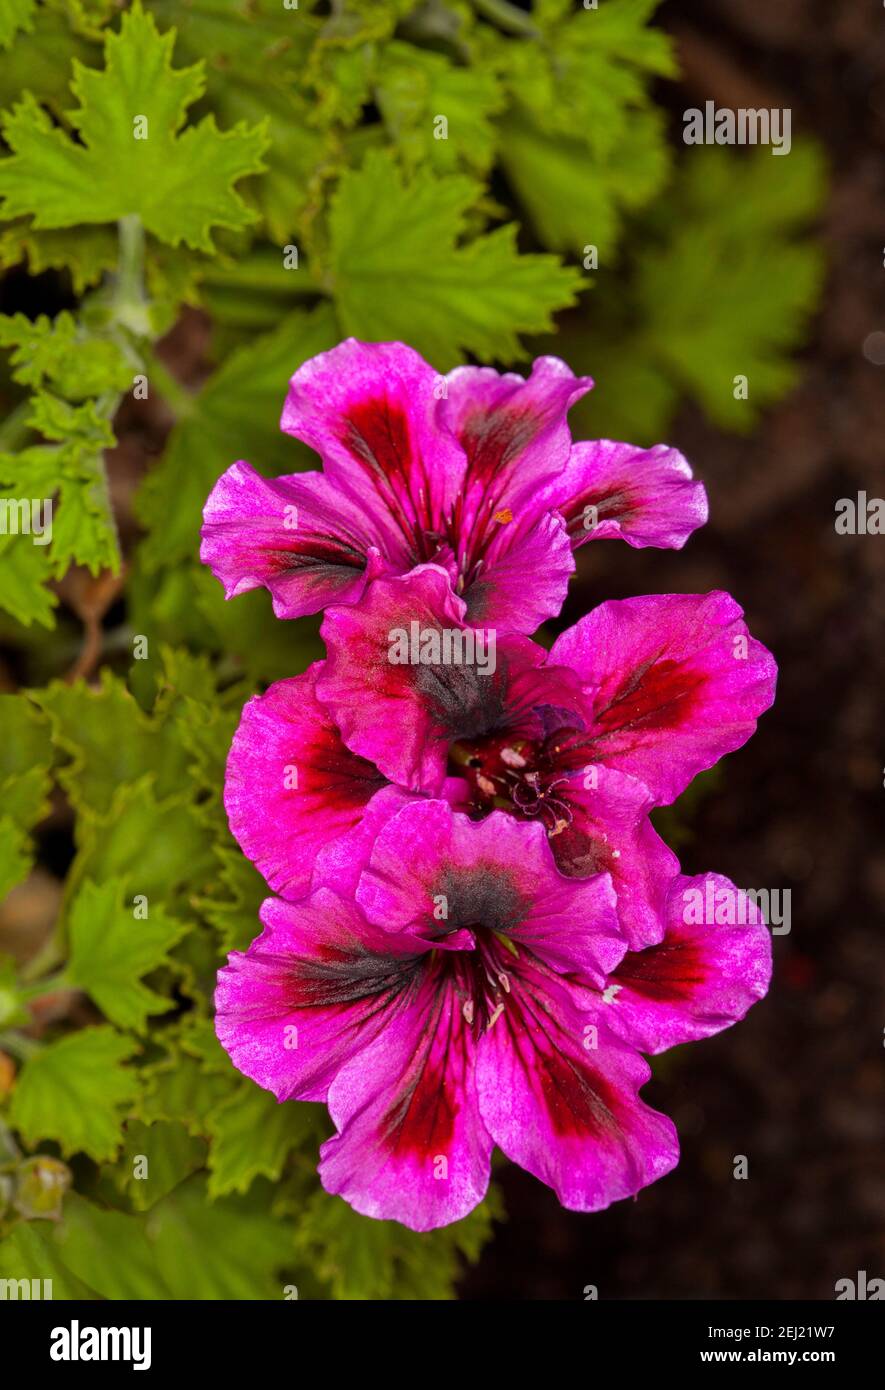 Stunning vivid magenta red  and black flowers and green foliage of Regal Pelargonium, a shrubby perennial, a member of the Geraniaceae family Stock Photo